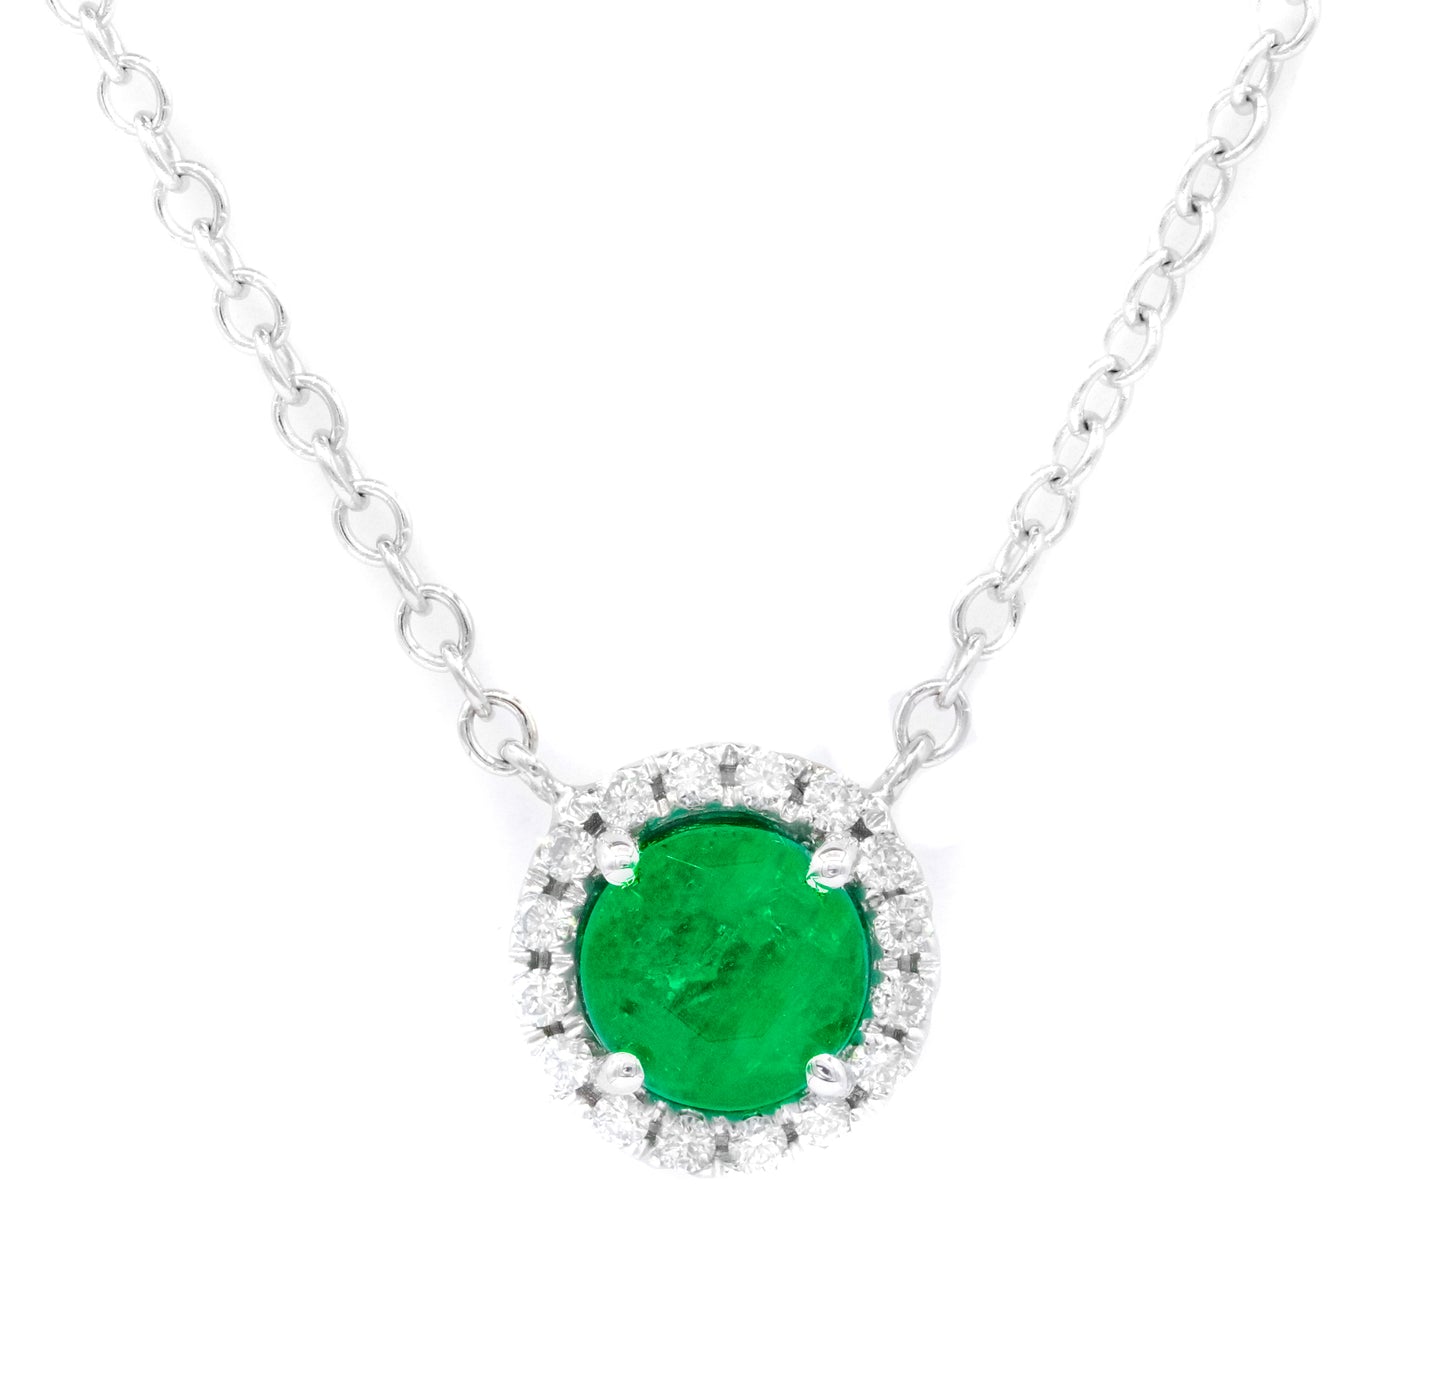 Monary Necklace featuring  0.12 carats of diamonds, 0.89 carats of emeralds set in 14K White Gold with 17 Stones